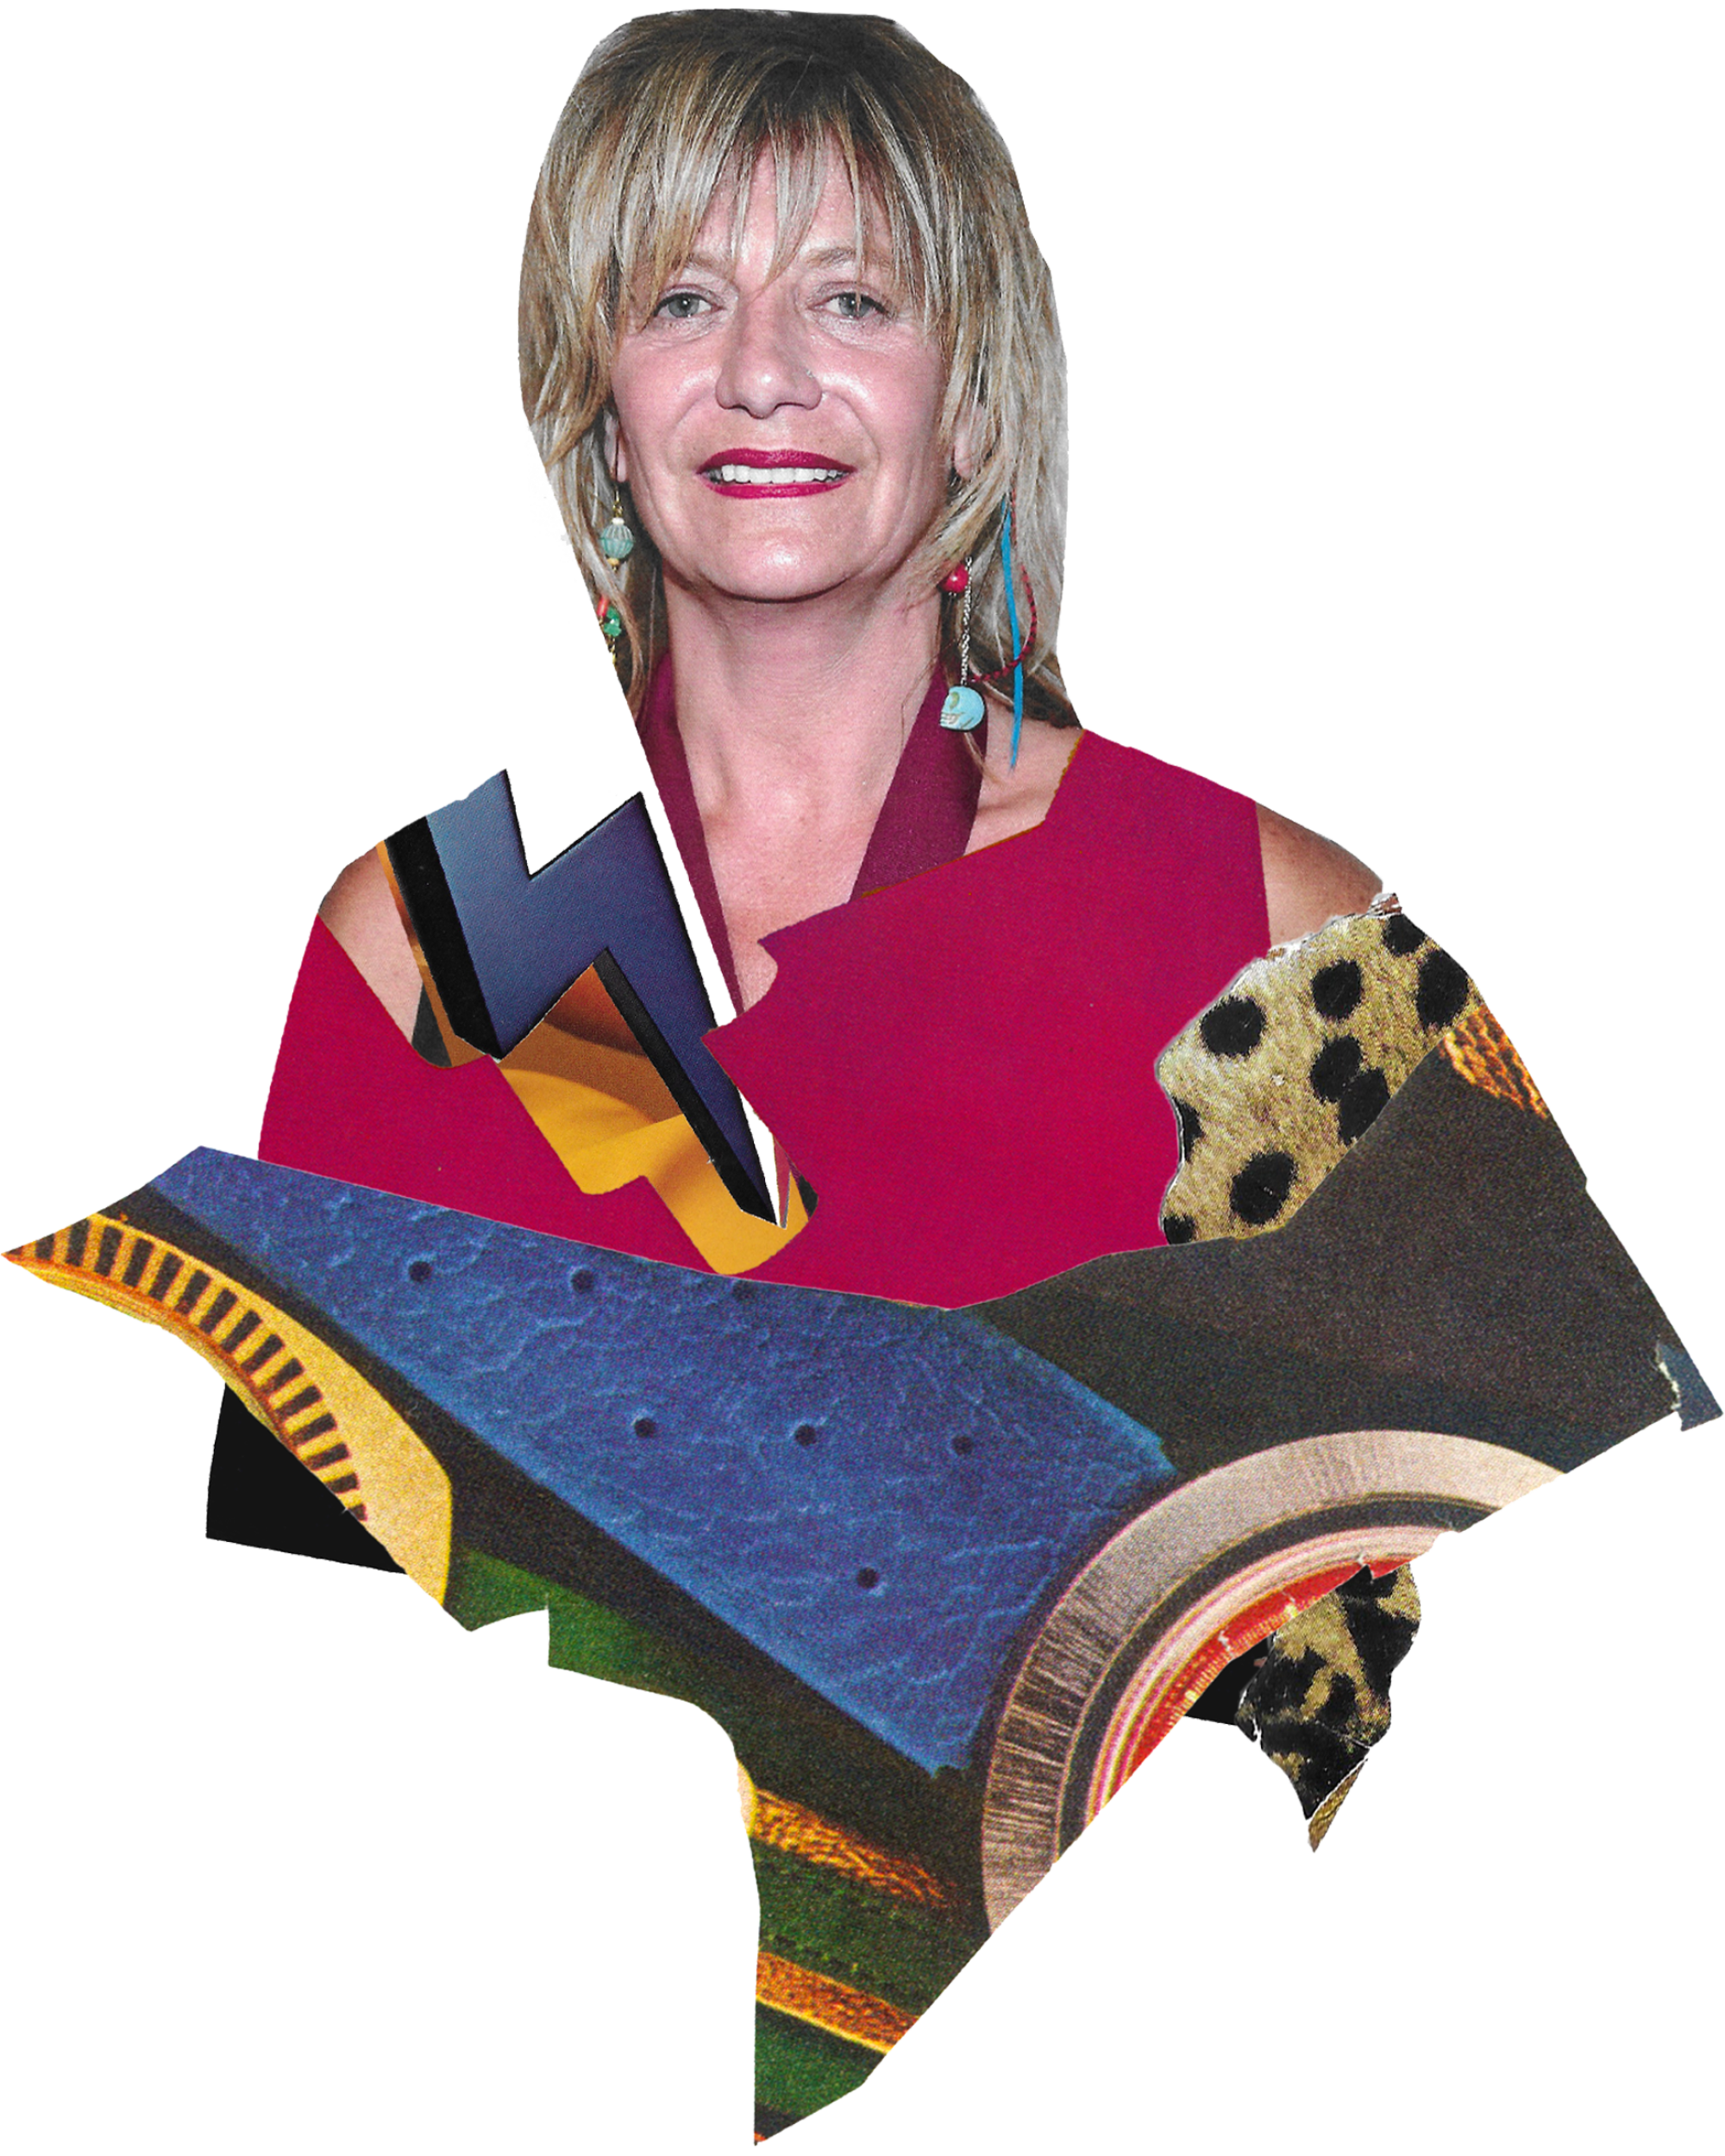 A cutout of a photo of Pebe Sebert with fragments of colorful paper.